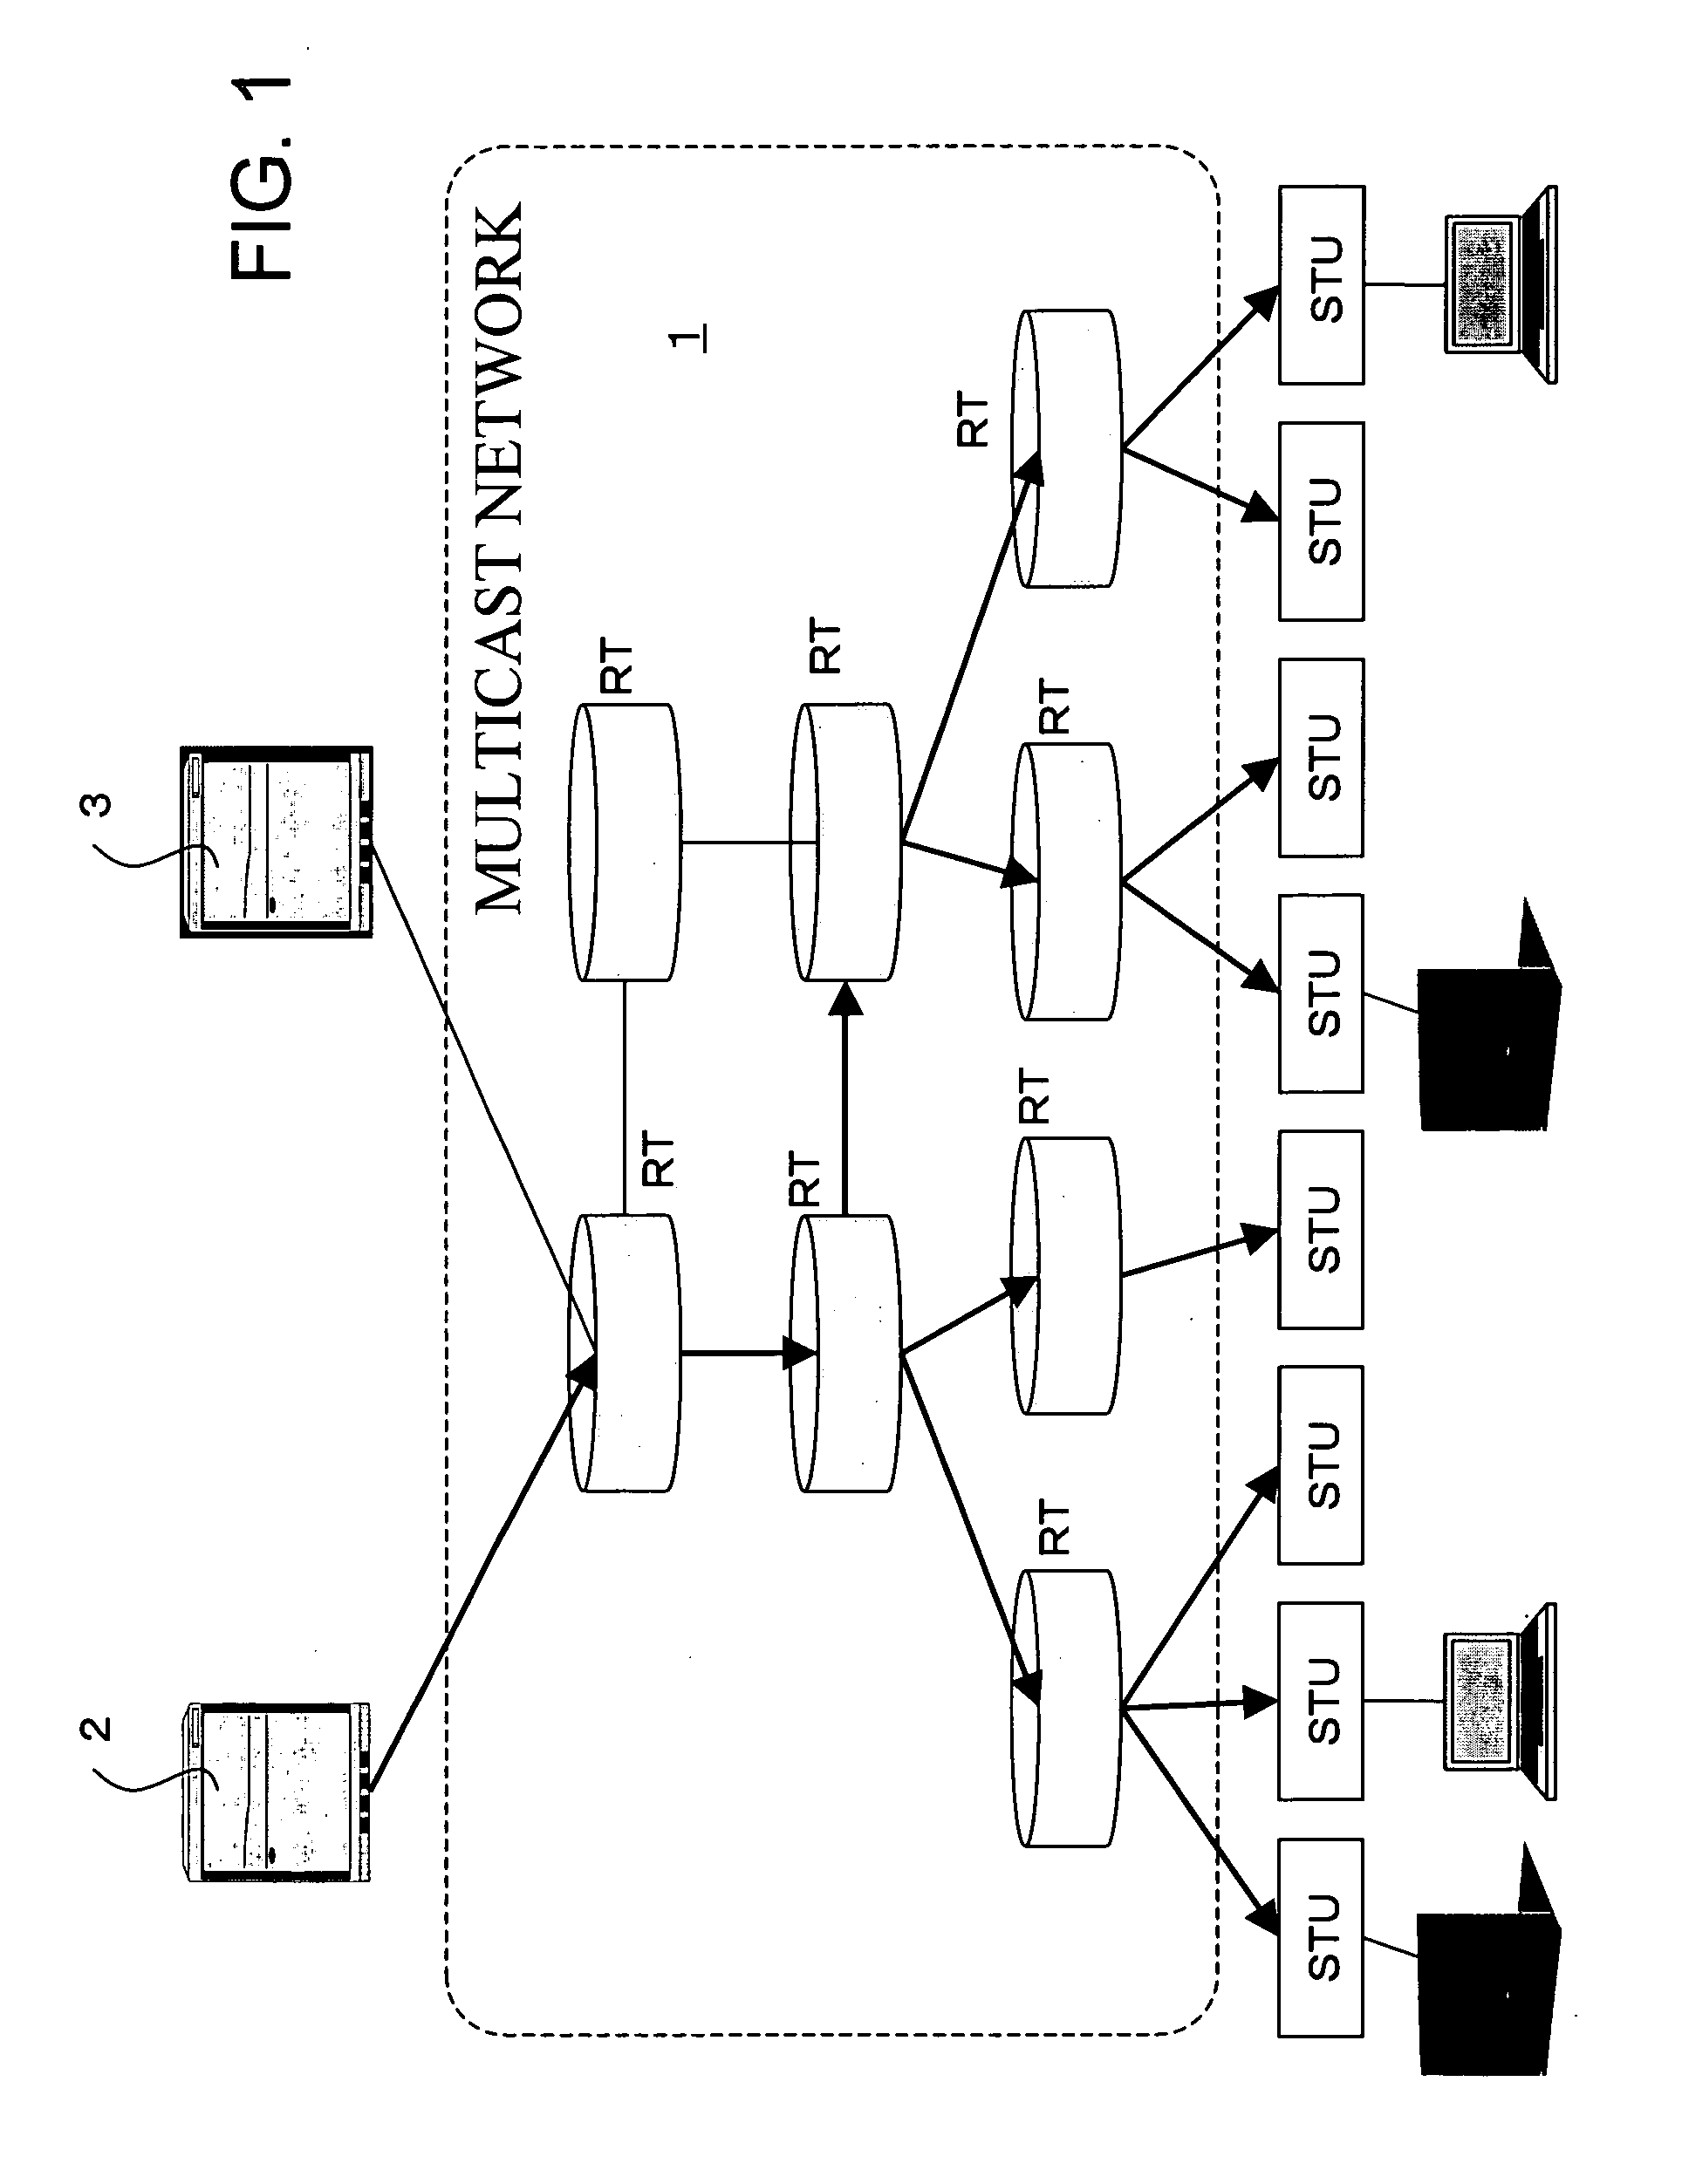 Multicast network monitoring method and multicast network system to which the method is applied